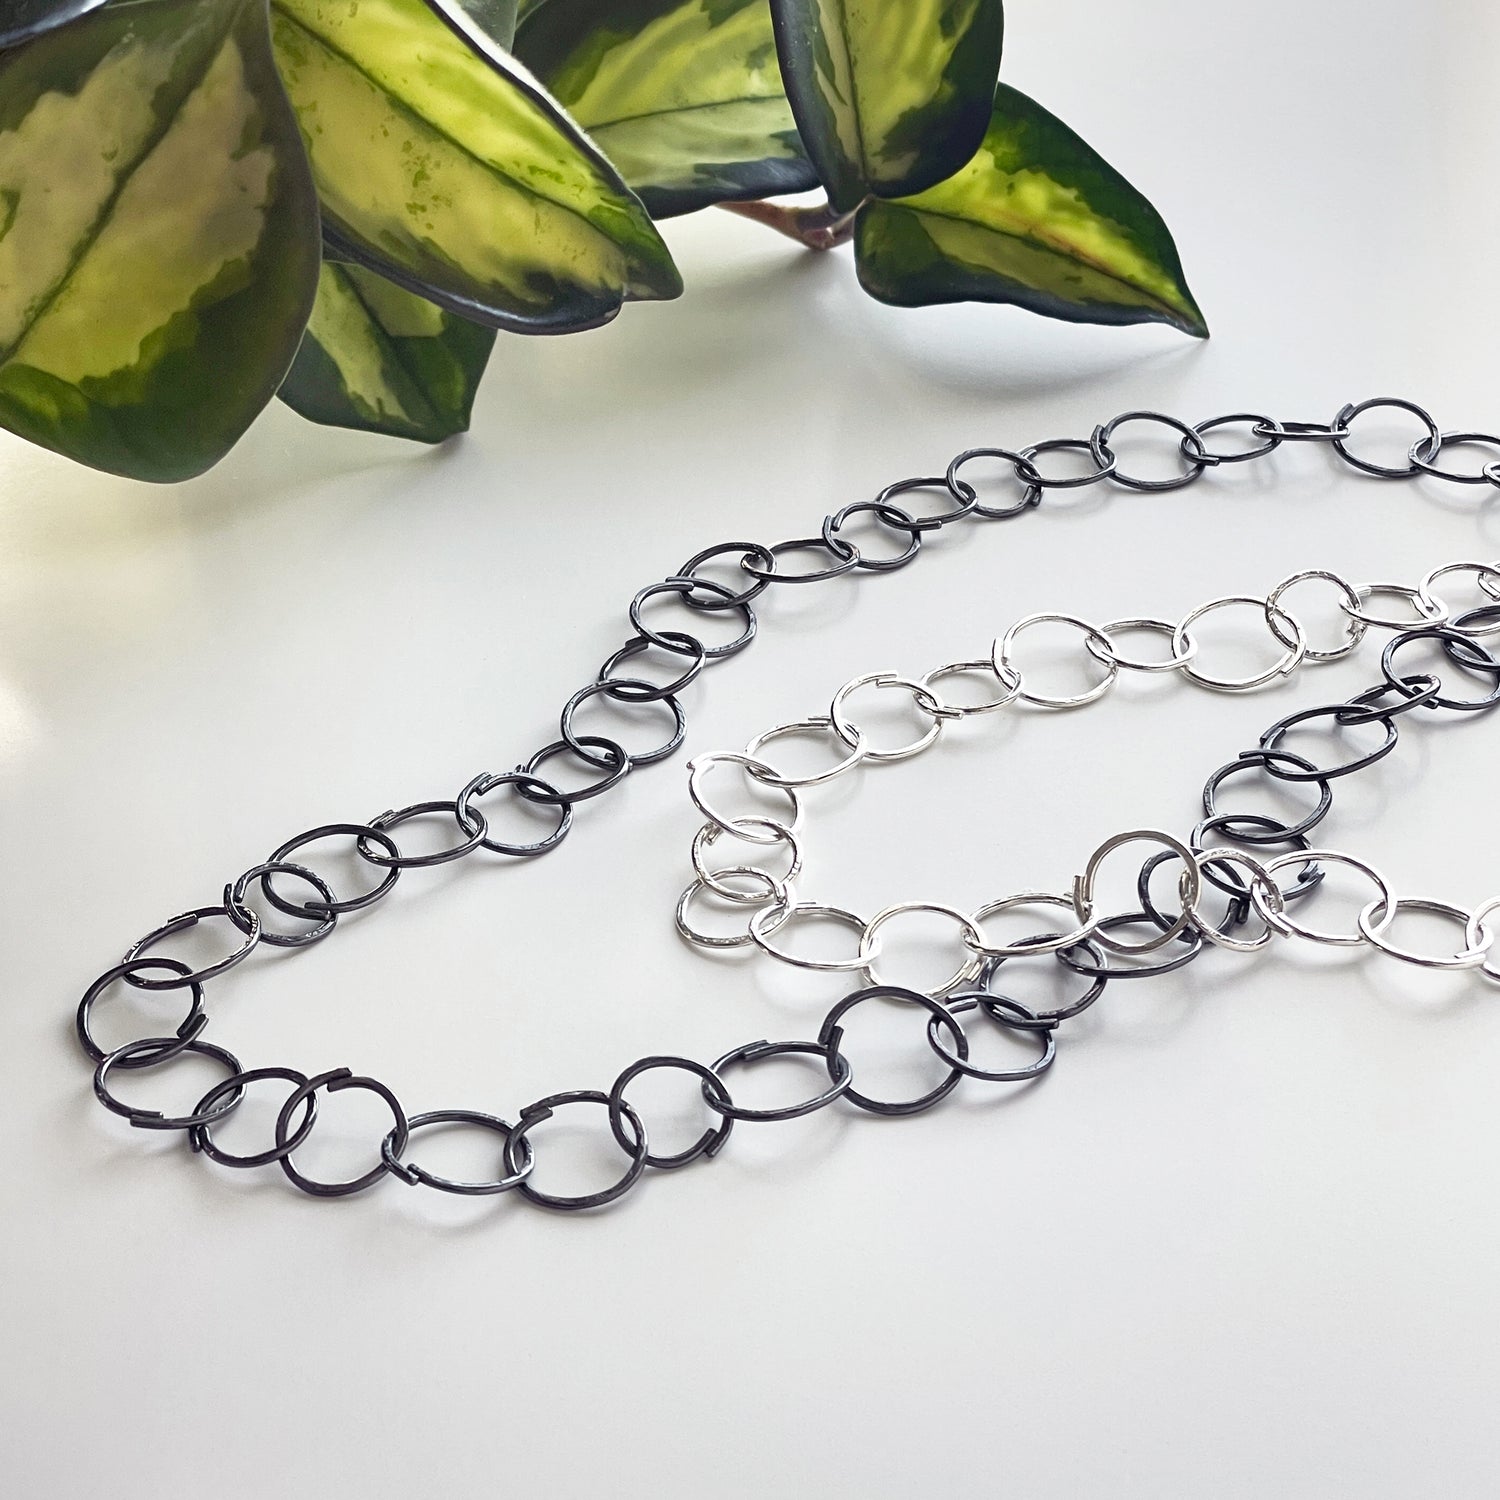 Sketch Full Chain Necklace - Sterling